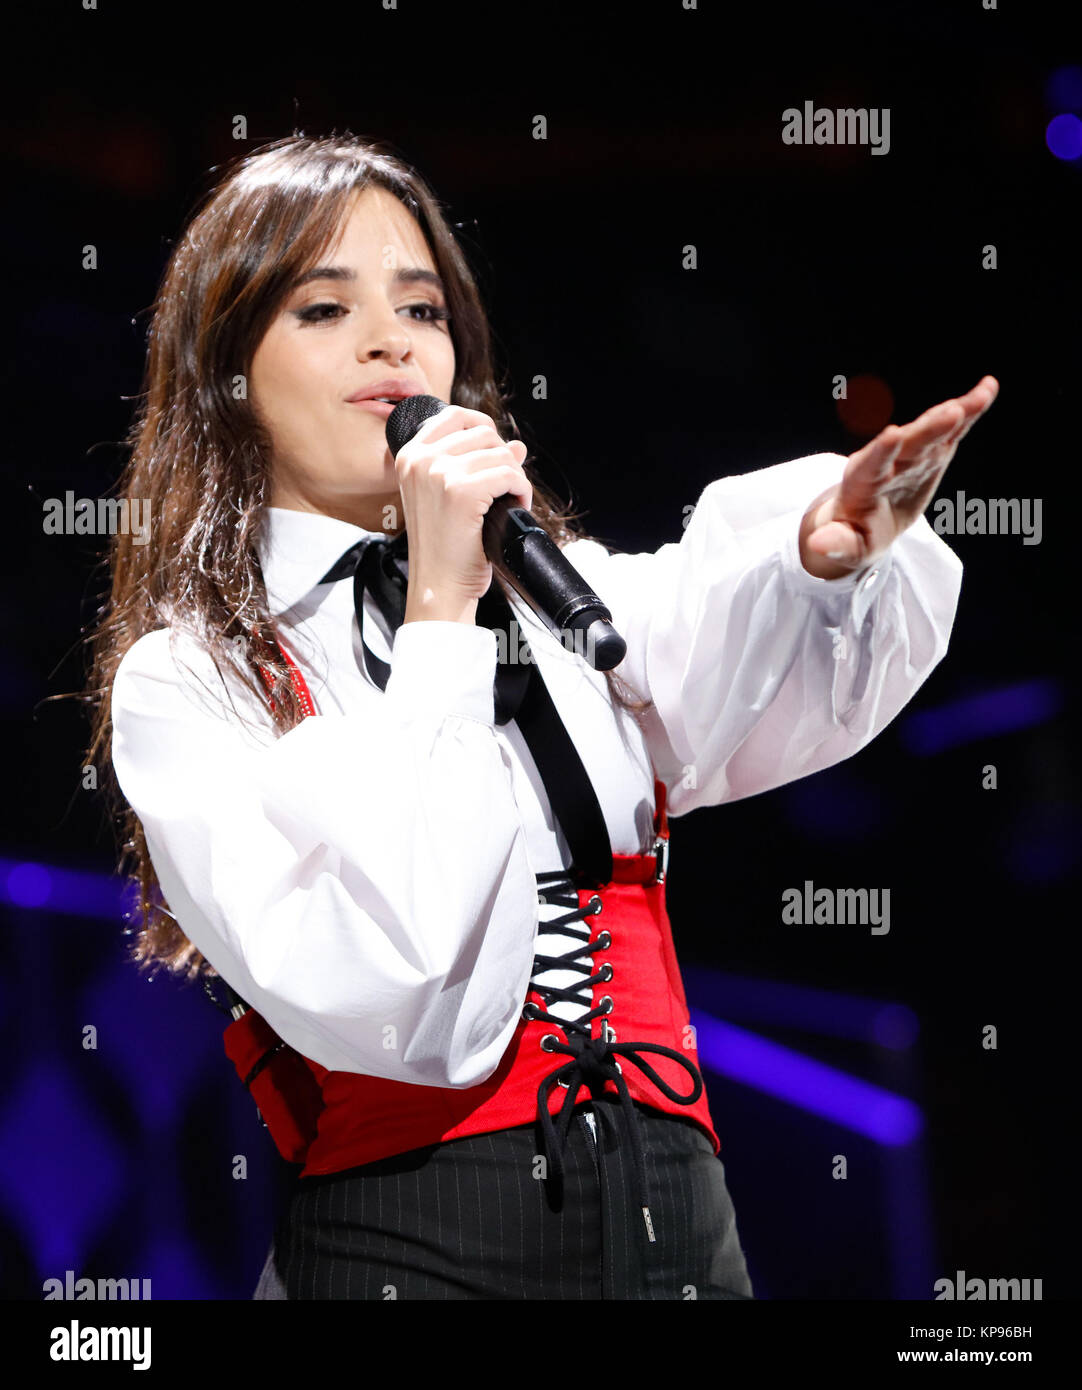 Camilla Cabello performs at the 99.5FM Jingle Ball presented by Capital One at the Capital One Center in Washington D.C. on 12/11/17 Stock Photo